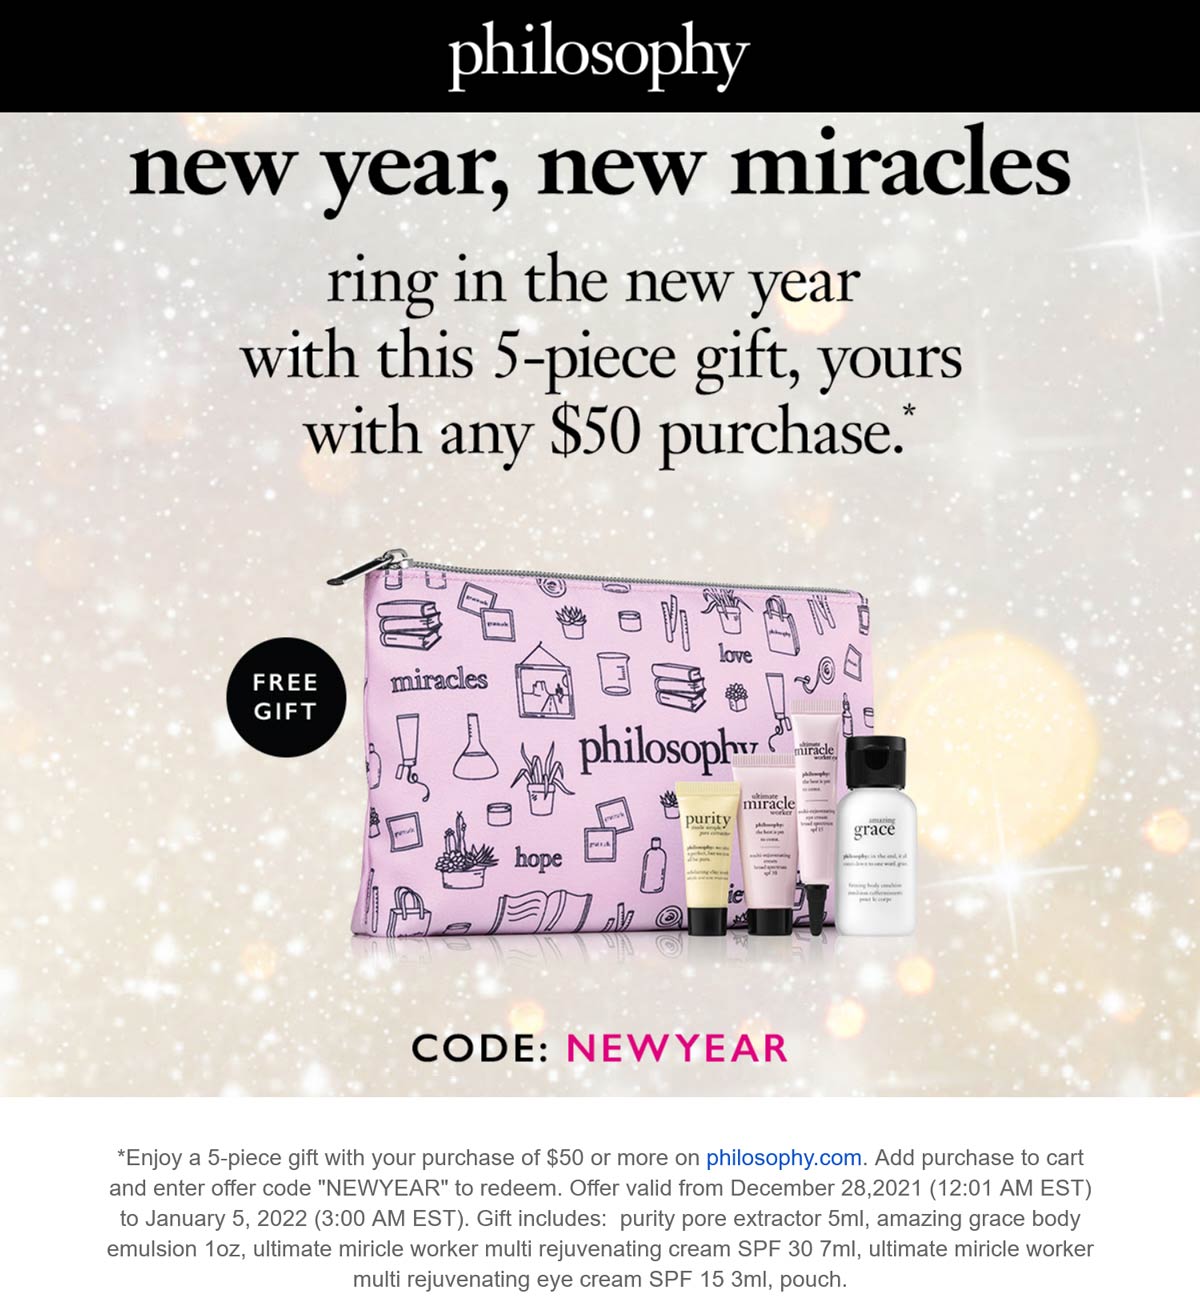 Philosophy stores Coupon  Free 5-piece set on $50 at Philosophy via promo code NEWYEAR #philosophy 